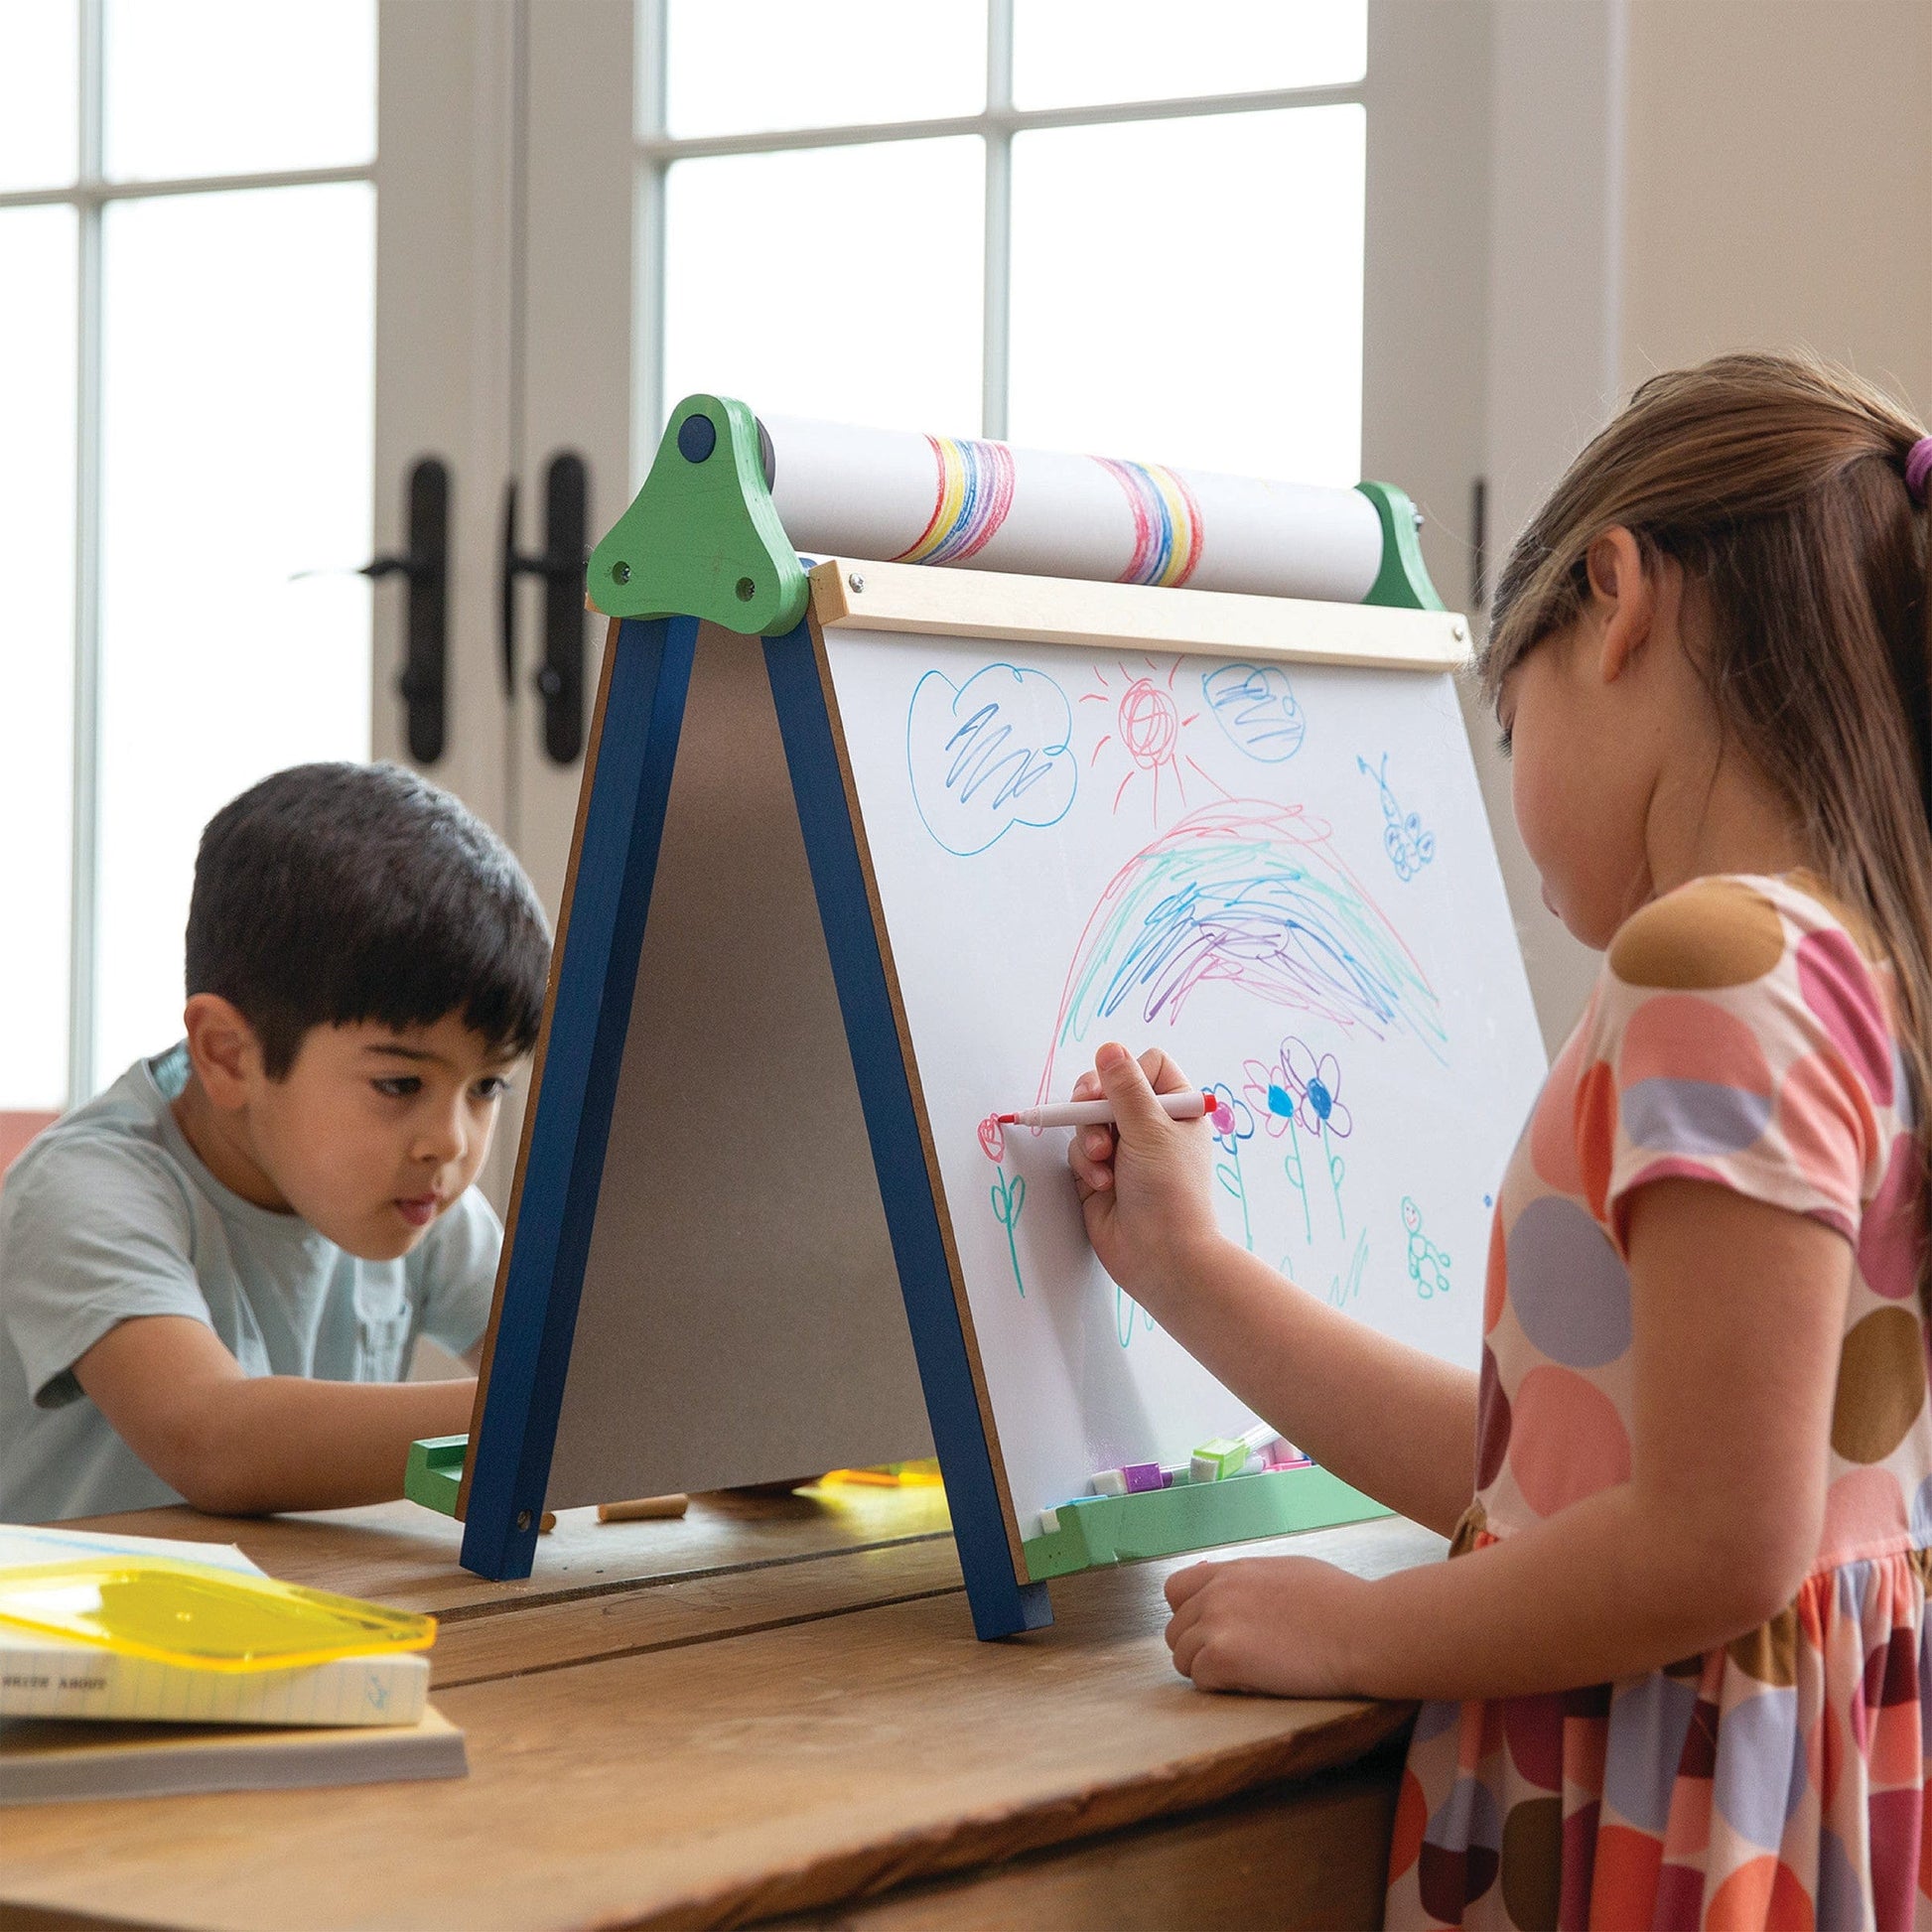 3-in-1 Folding Tabletop Easel with Chalkboard, Whiteboard, and Paper Roll Holder